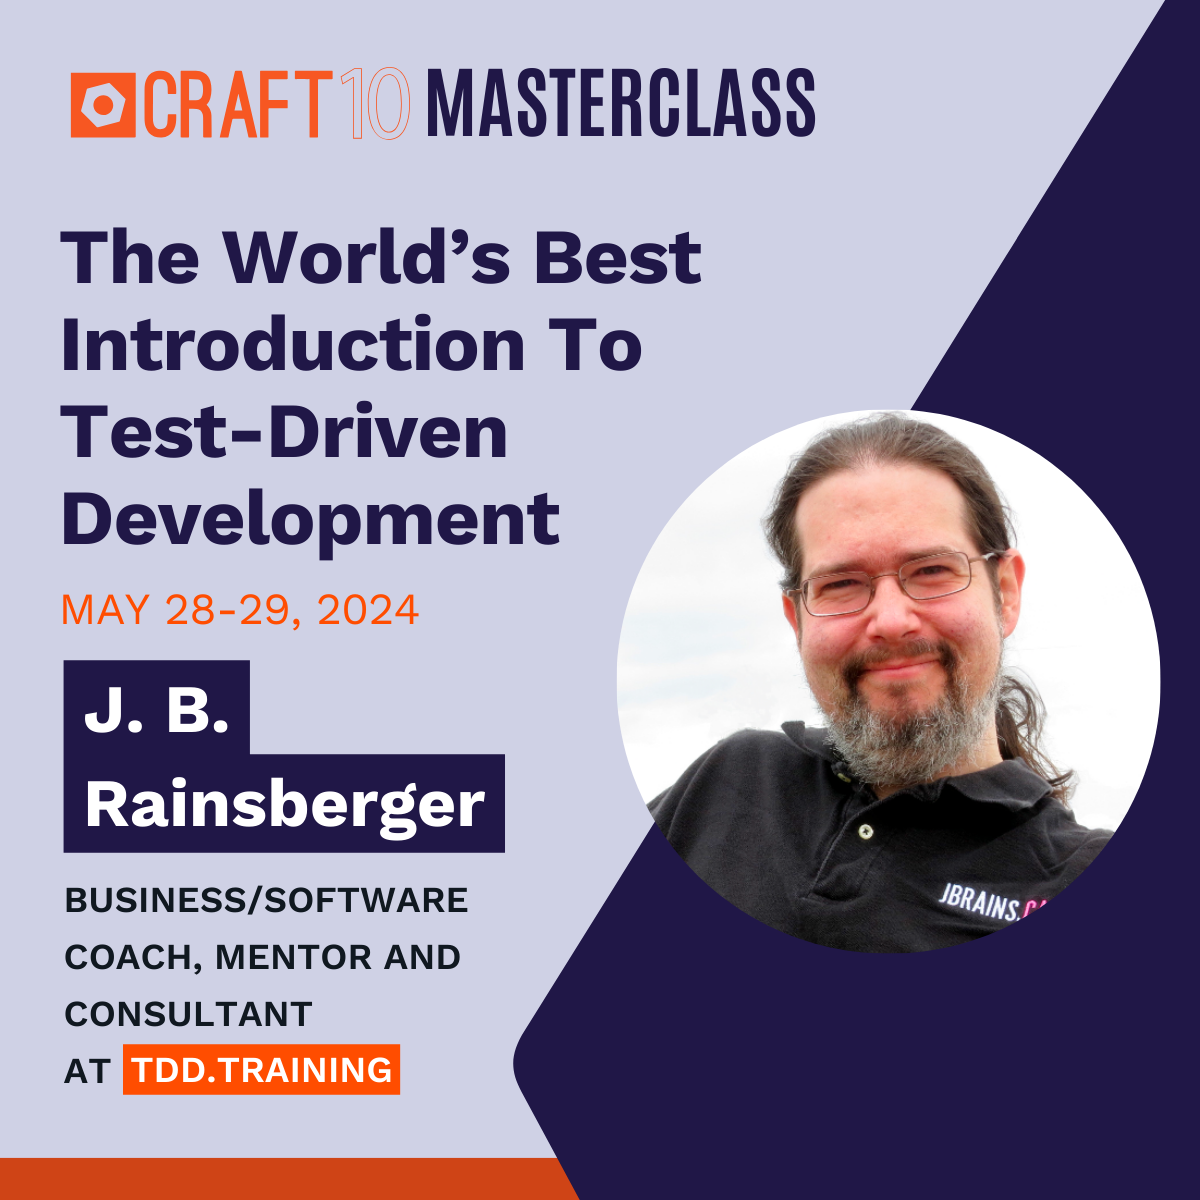 A poster for J. B. Rainsberger's TDD course in Budapest in May 2024, including a headshot of him